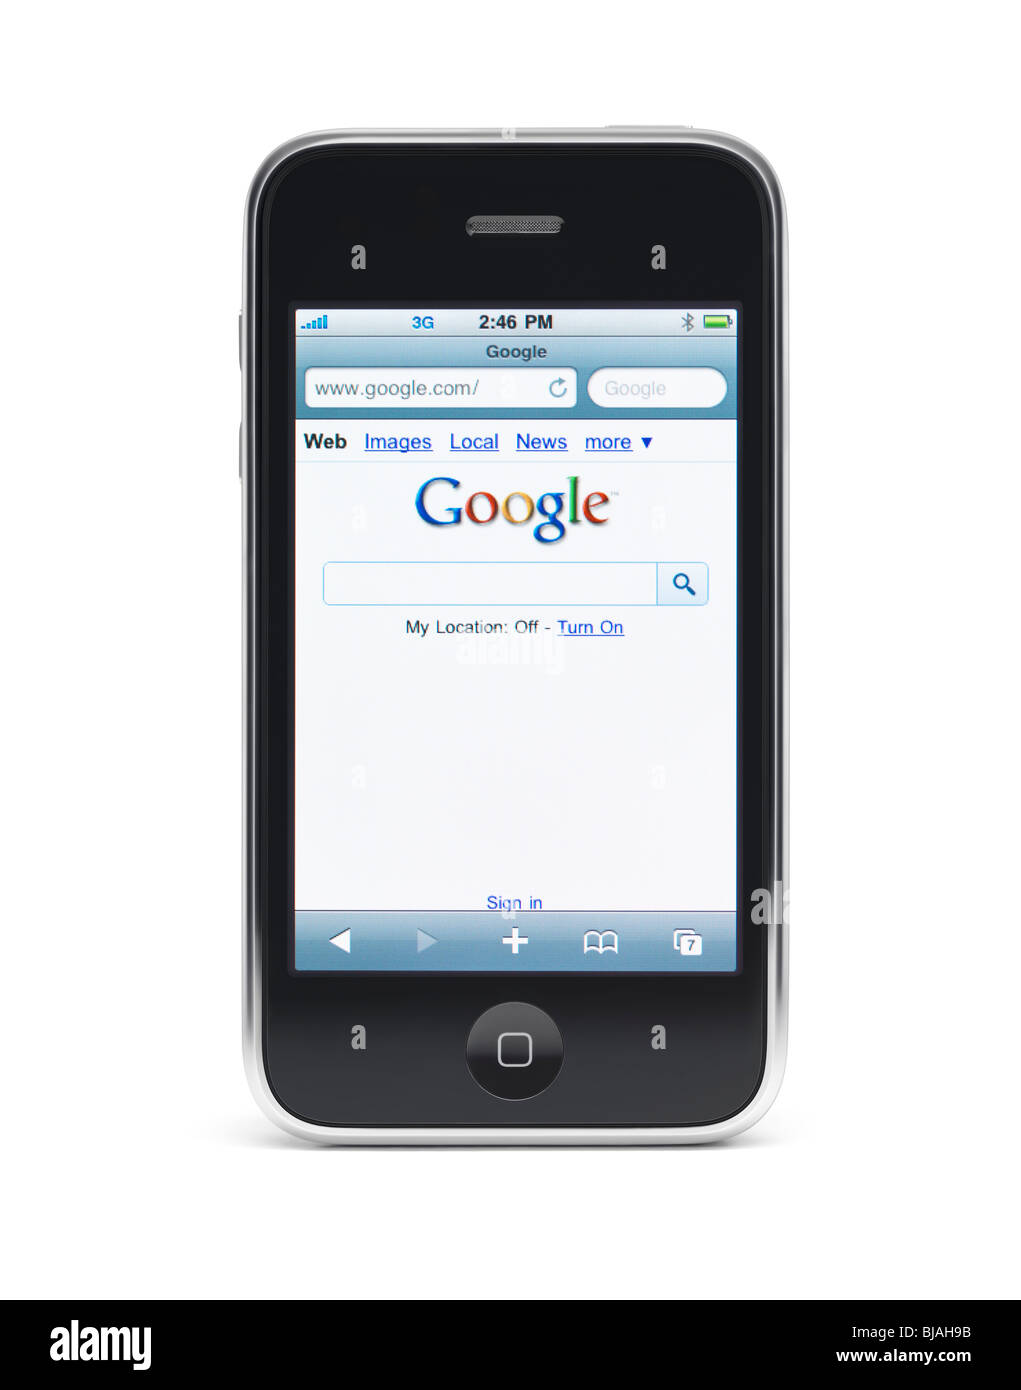 Apple iPhone 3Gs 3G smartphone displaying Google search front page on the screen isolated with clipping path on white background Stock Photo